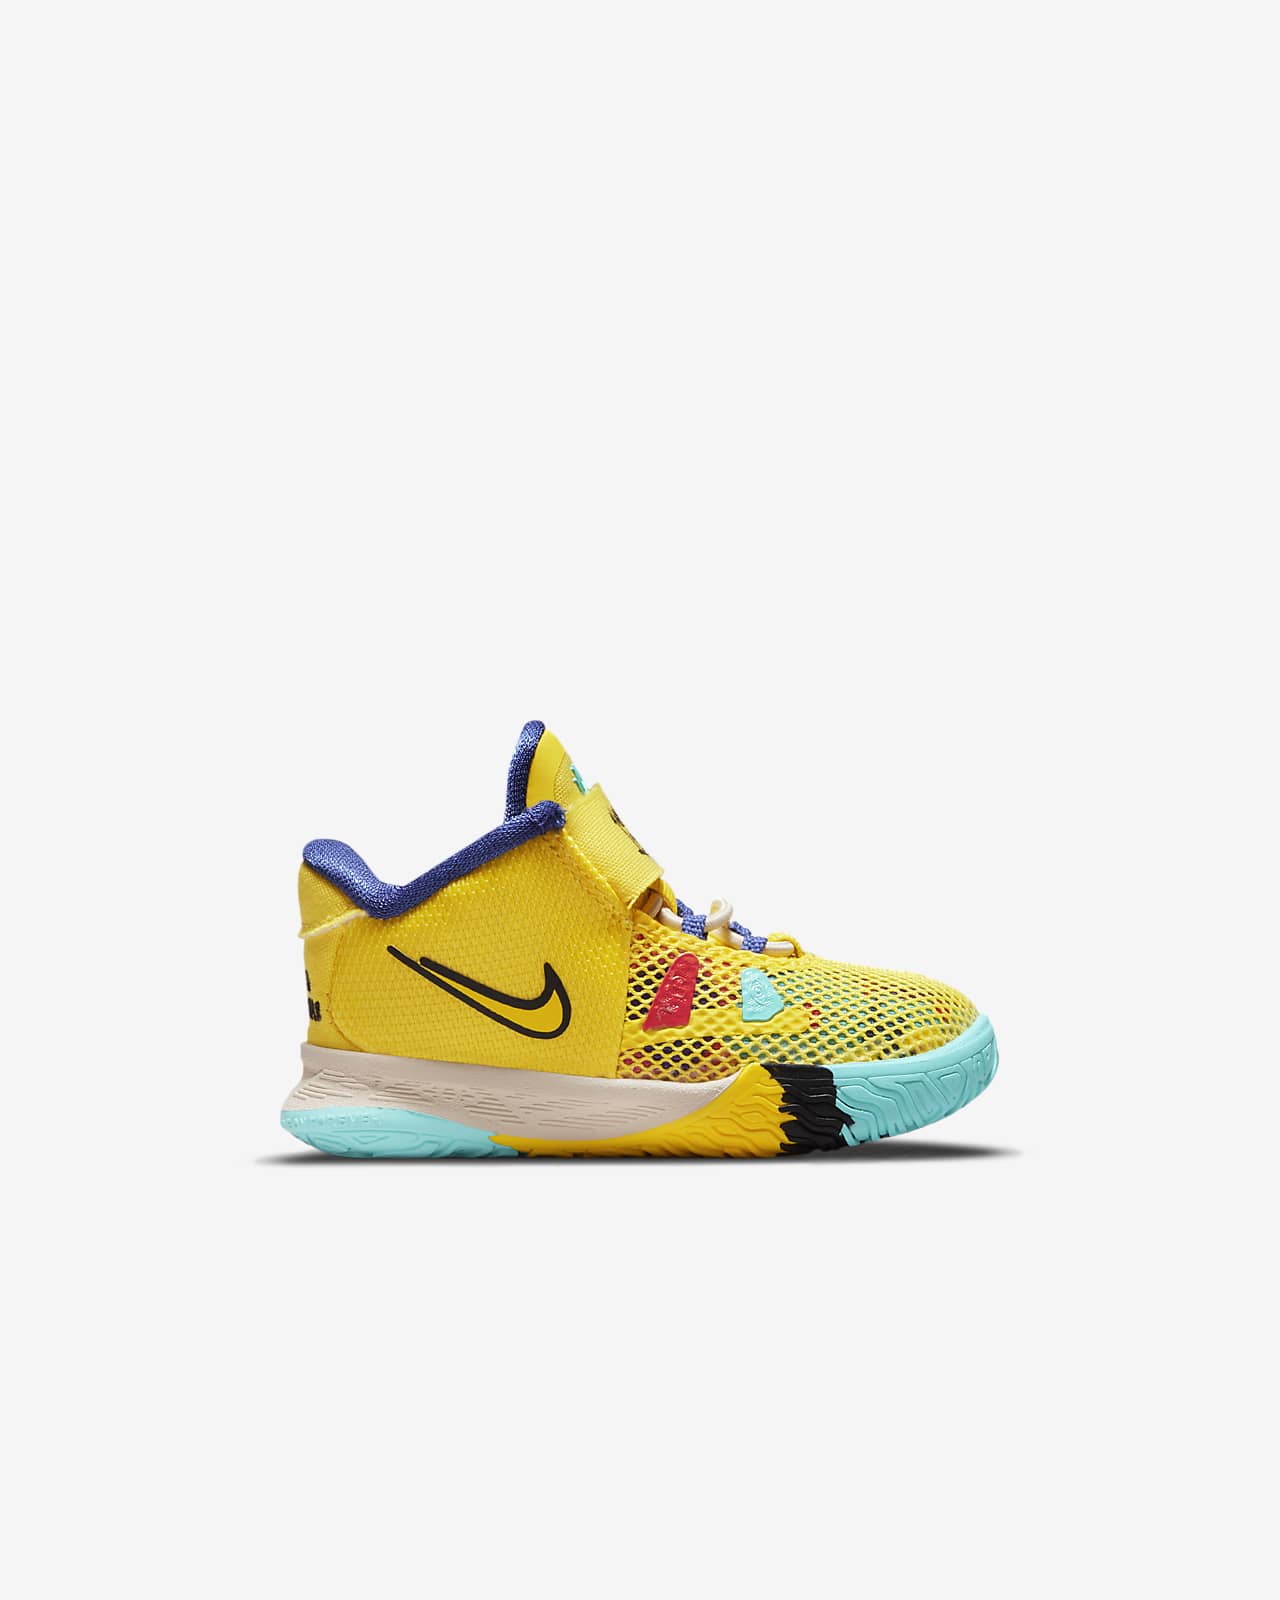 kyrie shoes kids